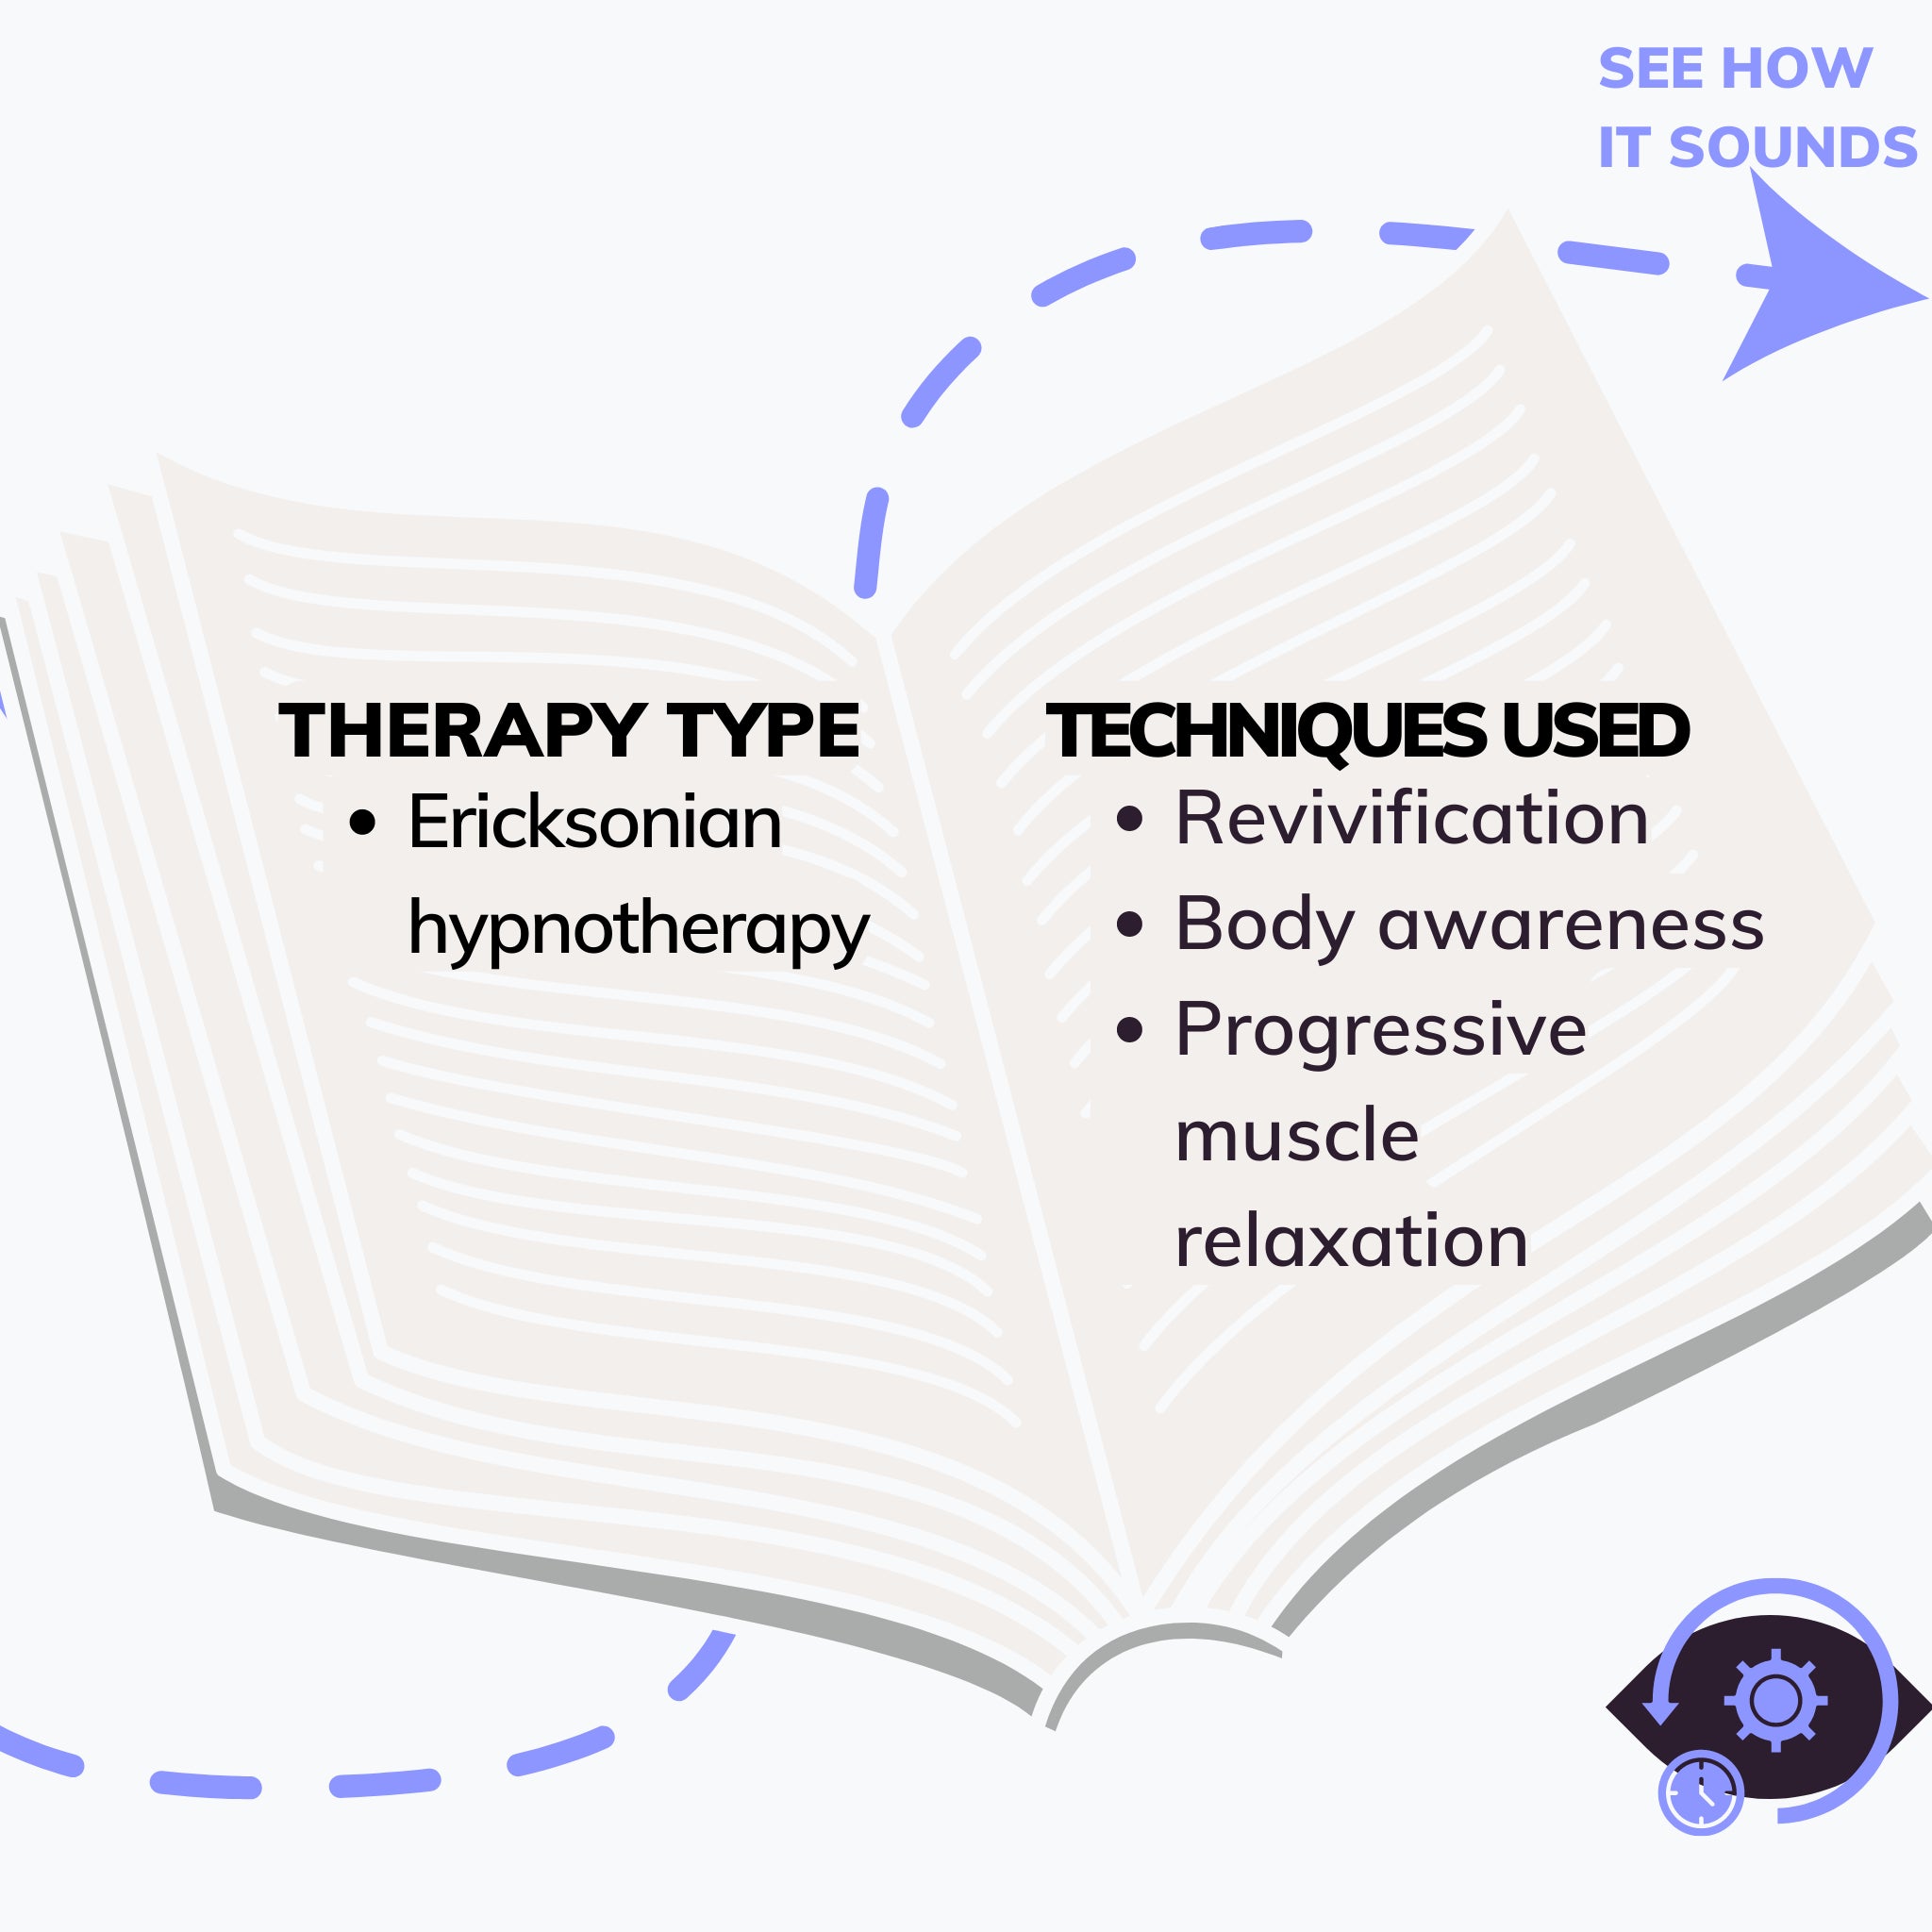 How it's made? Ericksonian hypnotherapy trance that contains techniques for revivification, body awareness and progressive muscle relaxation